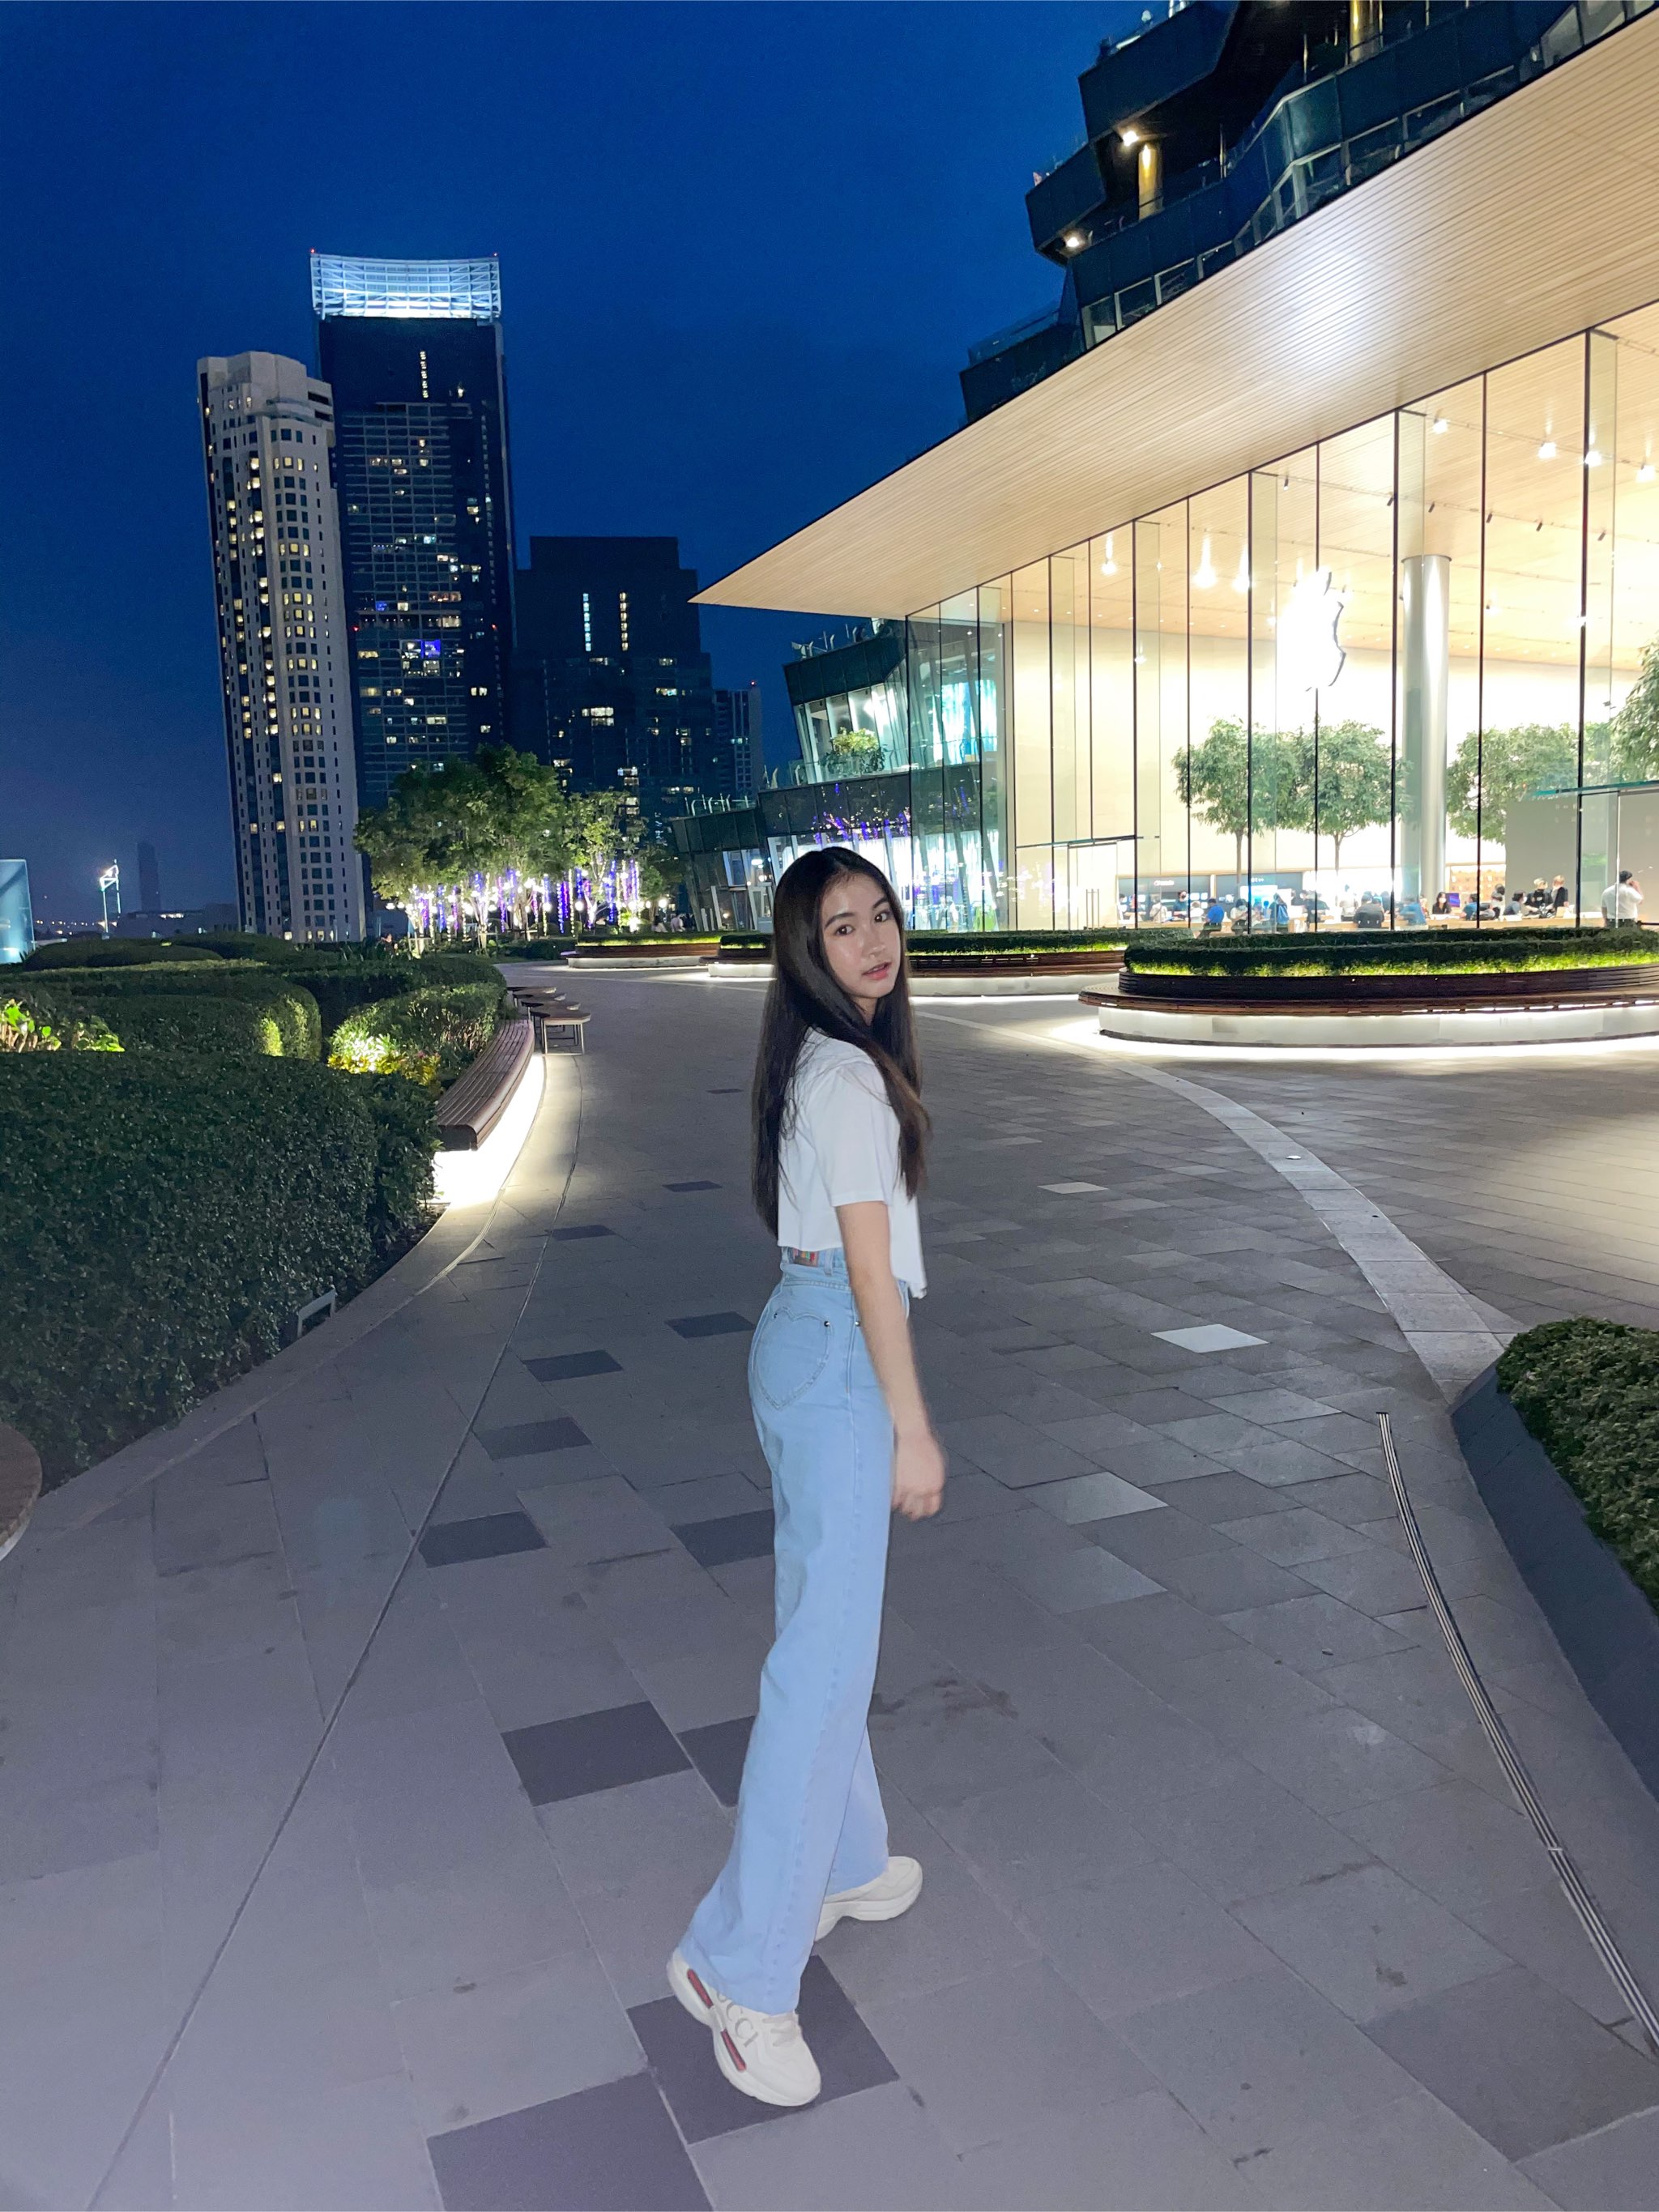 Paeyah BNK48. Check out these amazing videos! - iAM48 Official Application